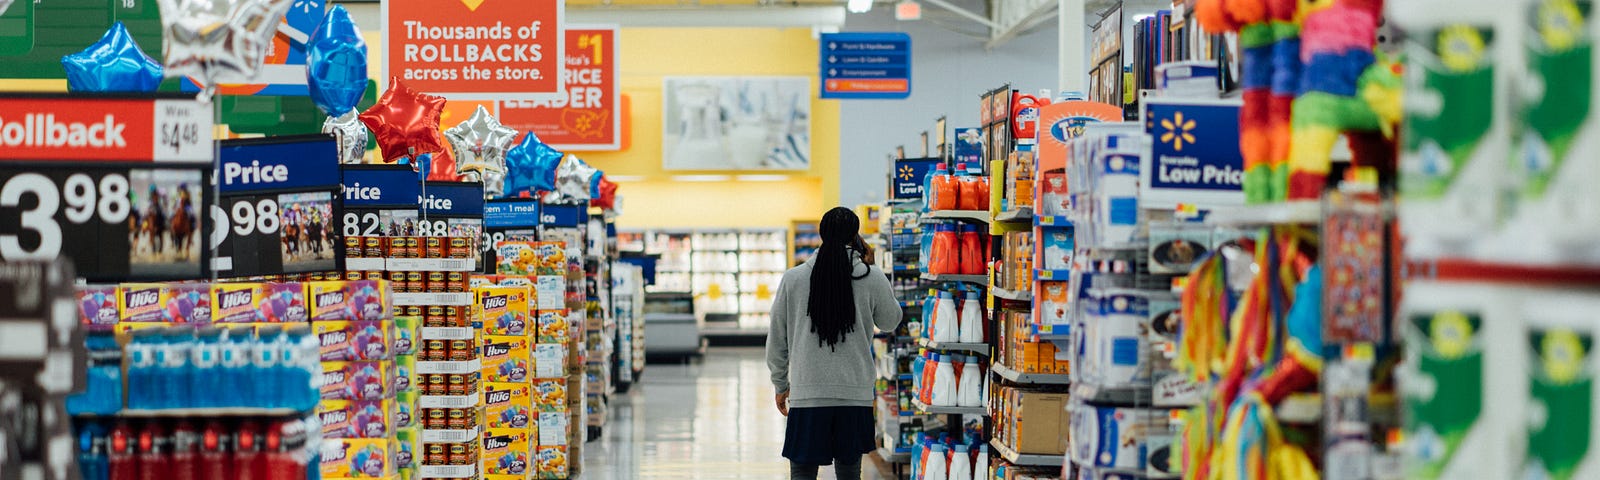 A woman walking down a grocery store aisle and talking on the phone.